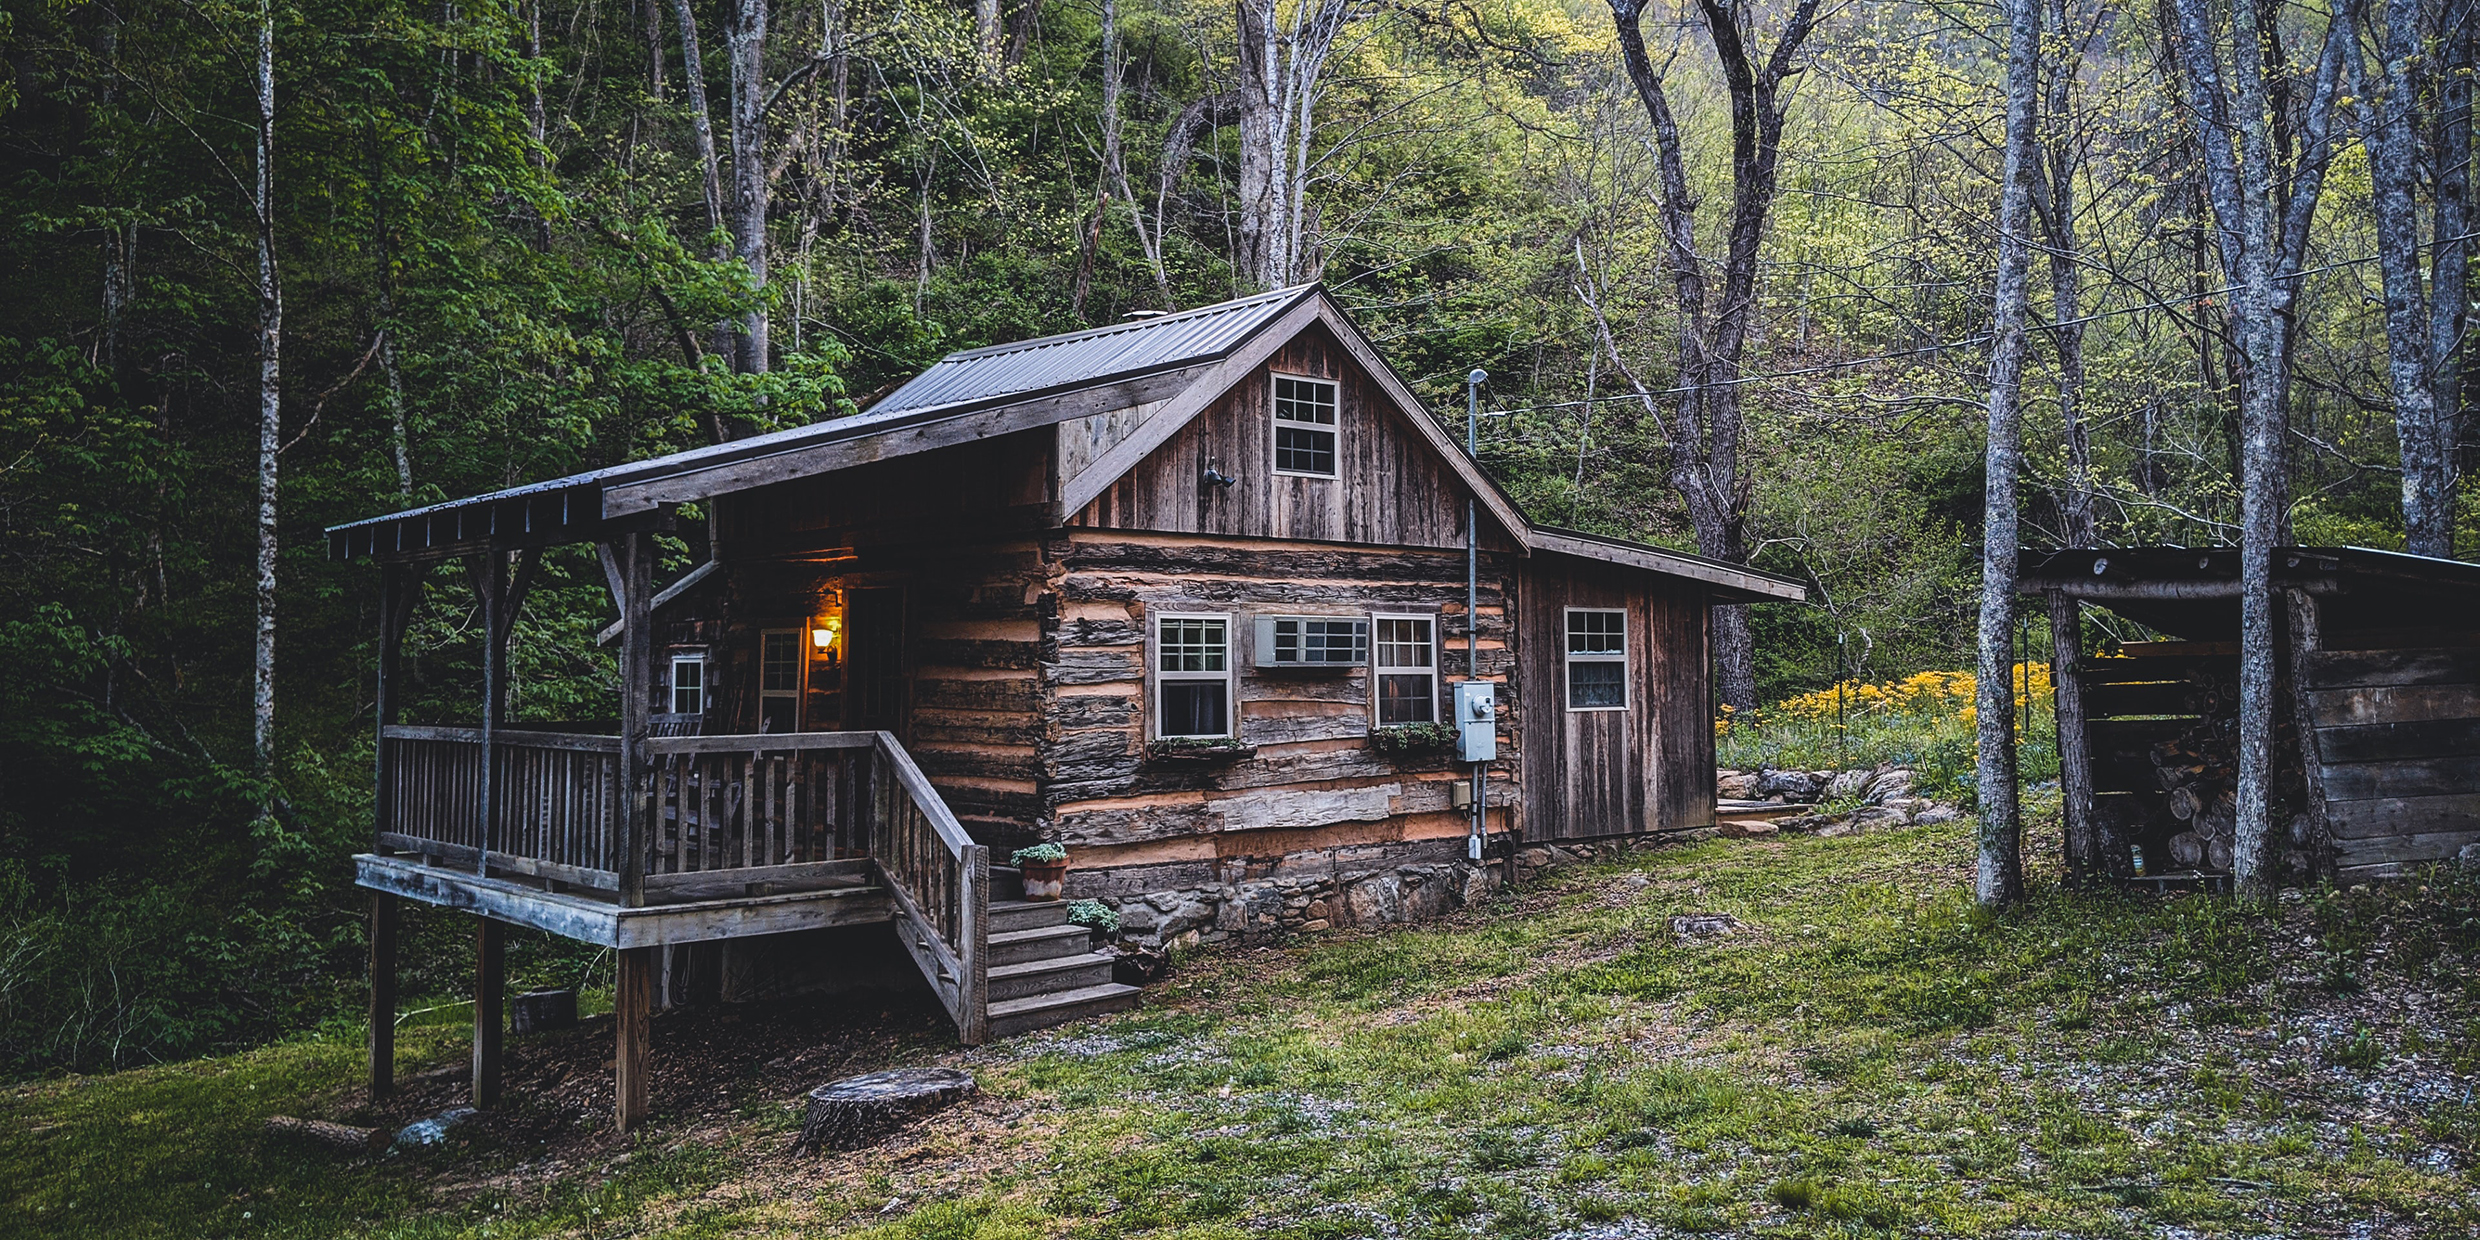 Image of a rustic cabin in the woods